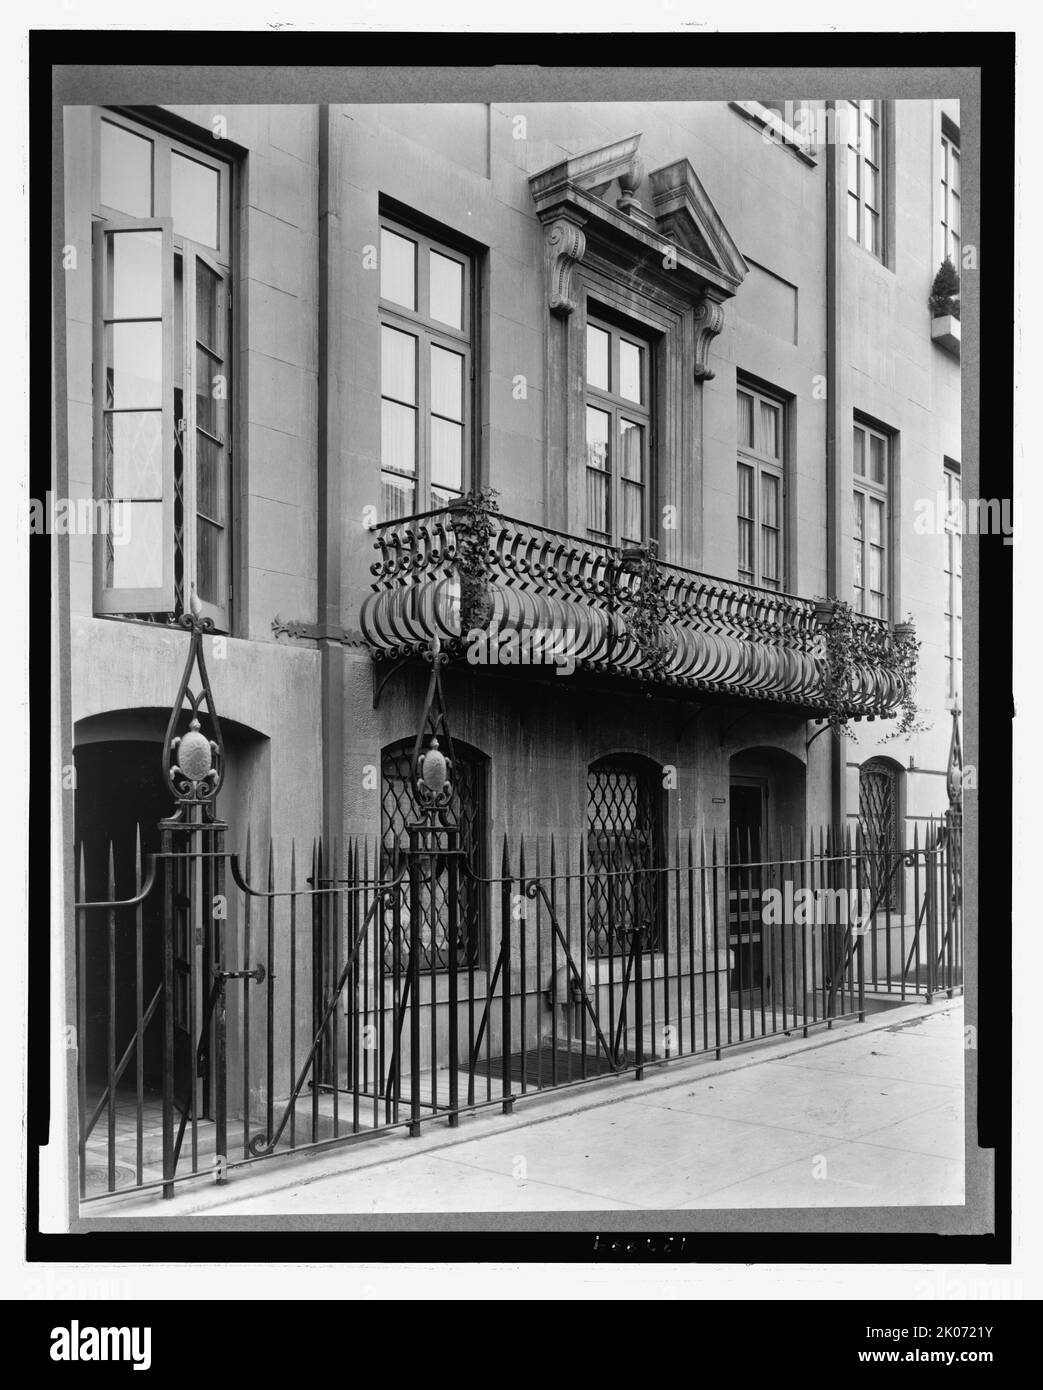 Charlotte Hunnewell Sorchan house, Turtle Bay Gardens, 228 East 49th Street, New York, New York, 1920. The entrance to the shared house of Edward Clarence Dean and Charlotte Bronson Hunnewell Sorchan at 228 E. 49th Street. Stock Photo